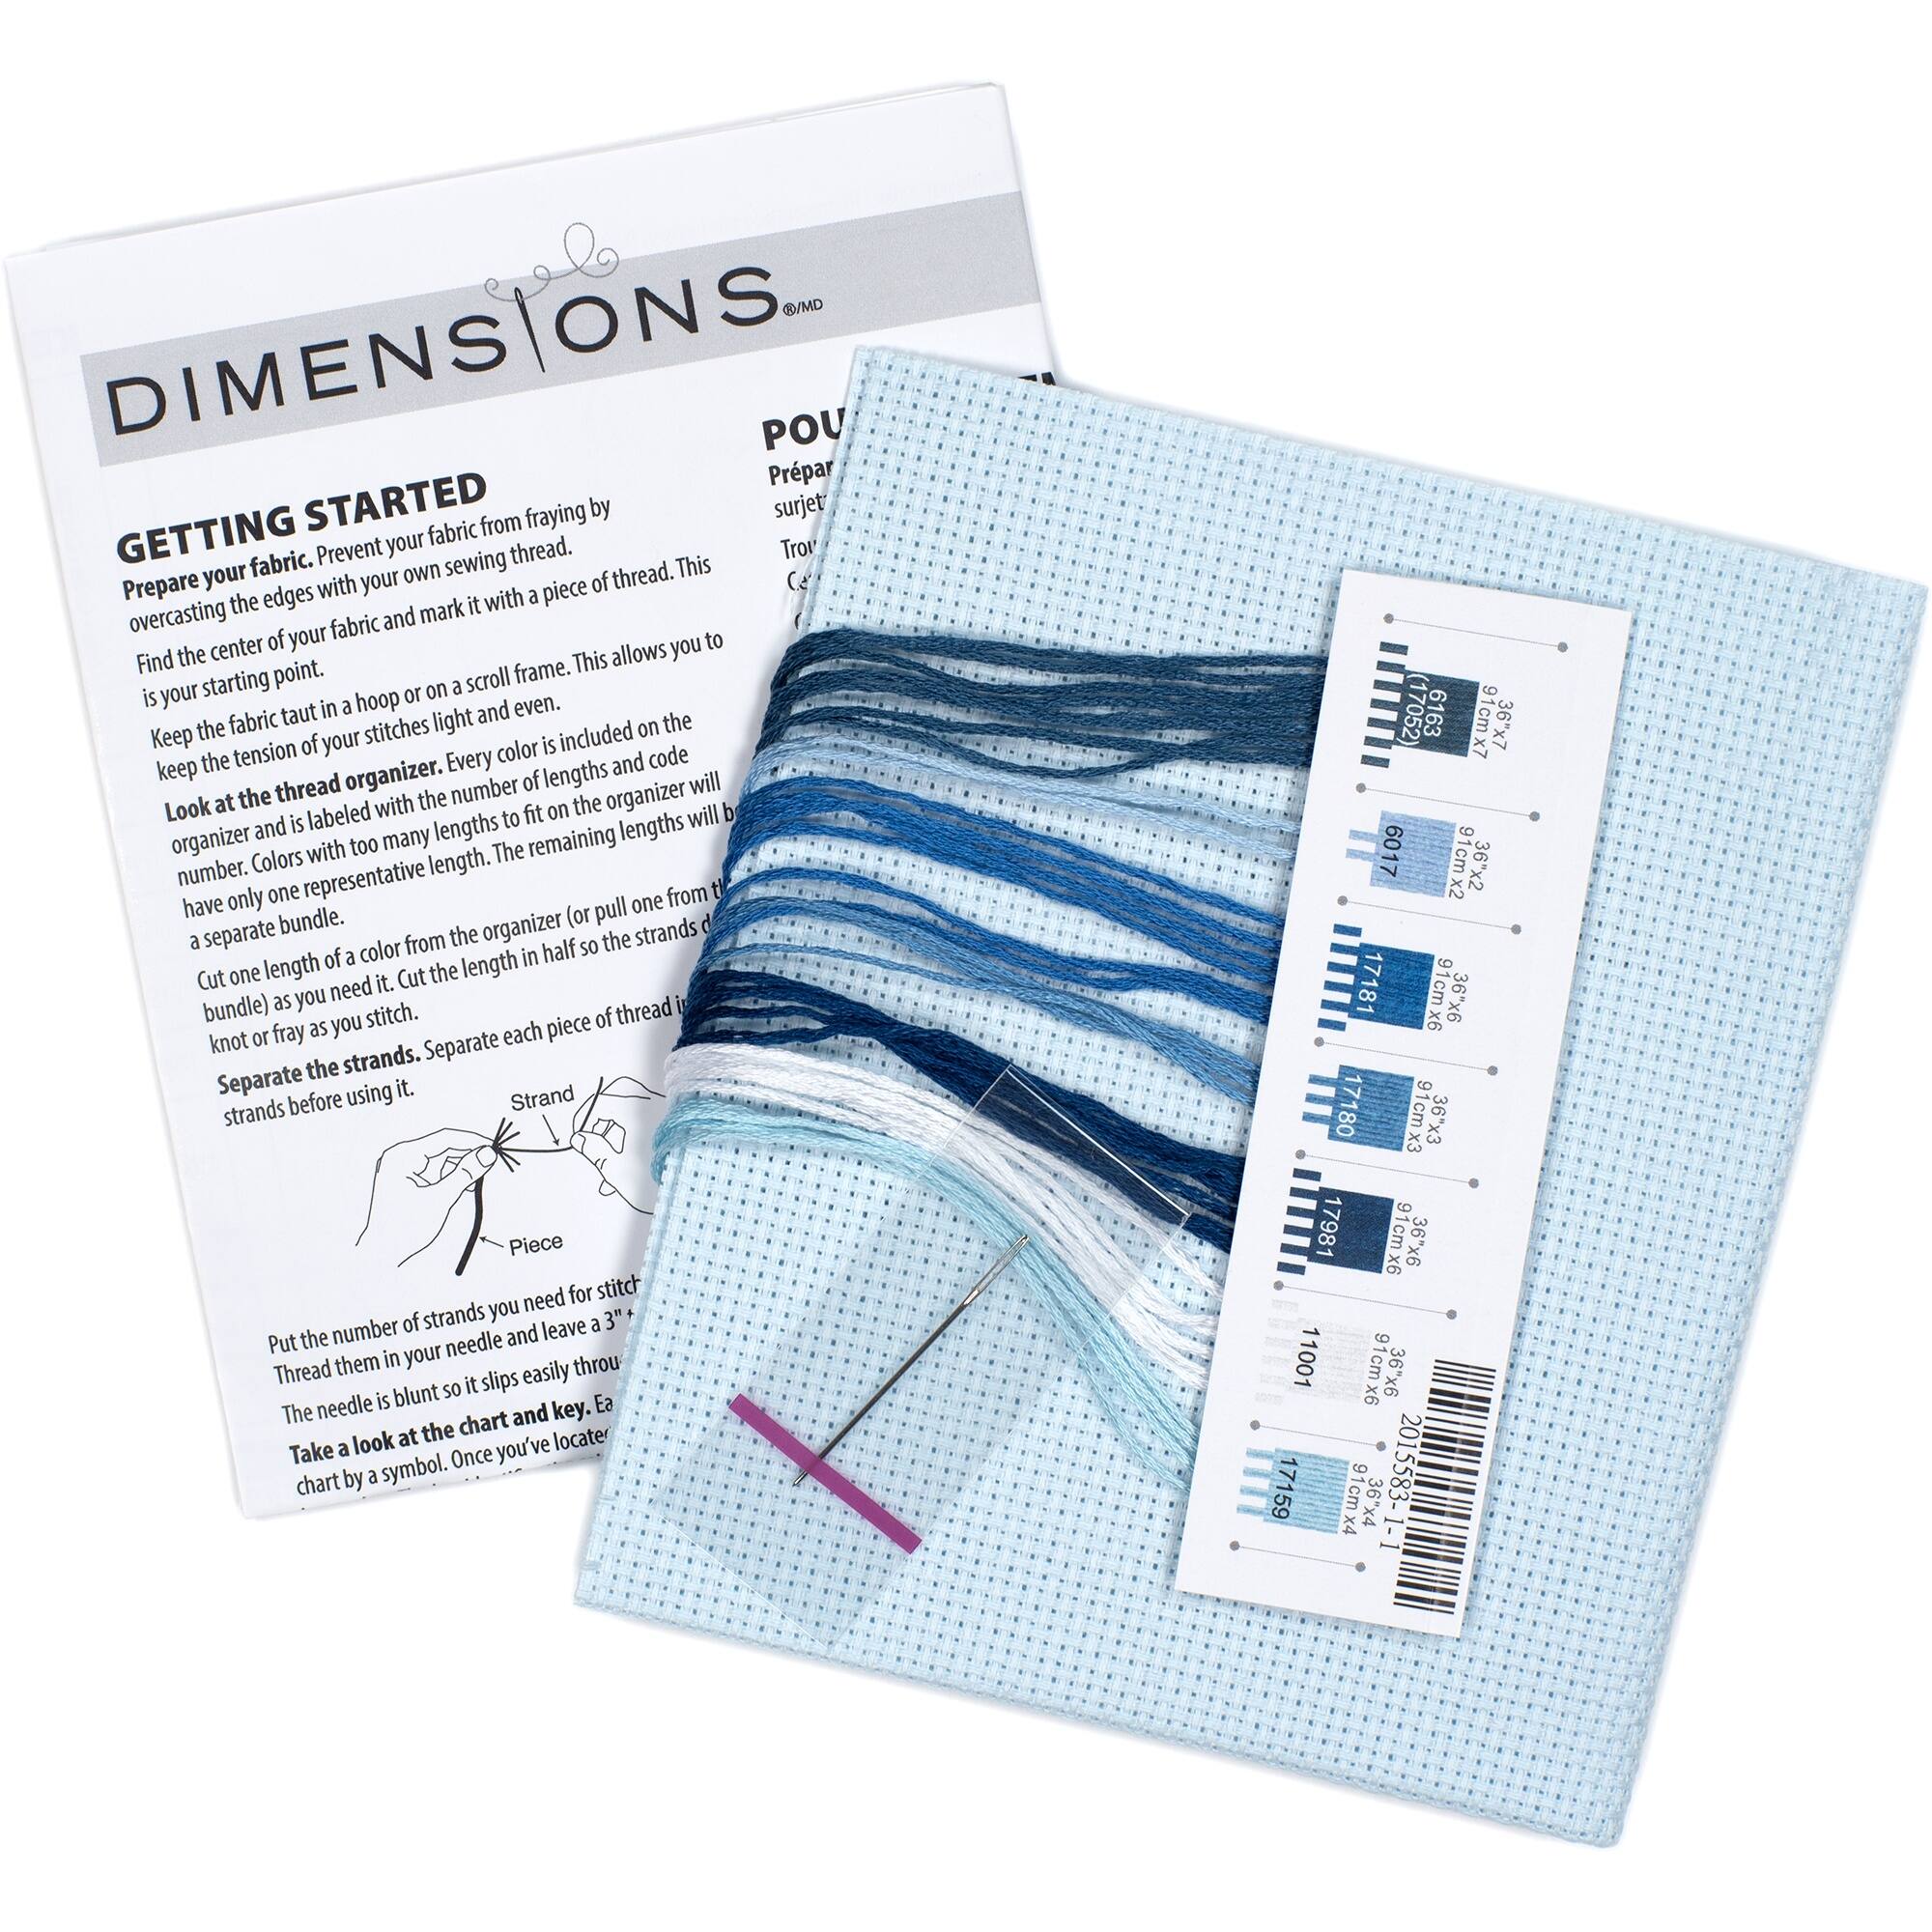 Dimensions&#xAE; Sea Turtle Counted Cross Stitch Kit